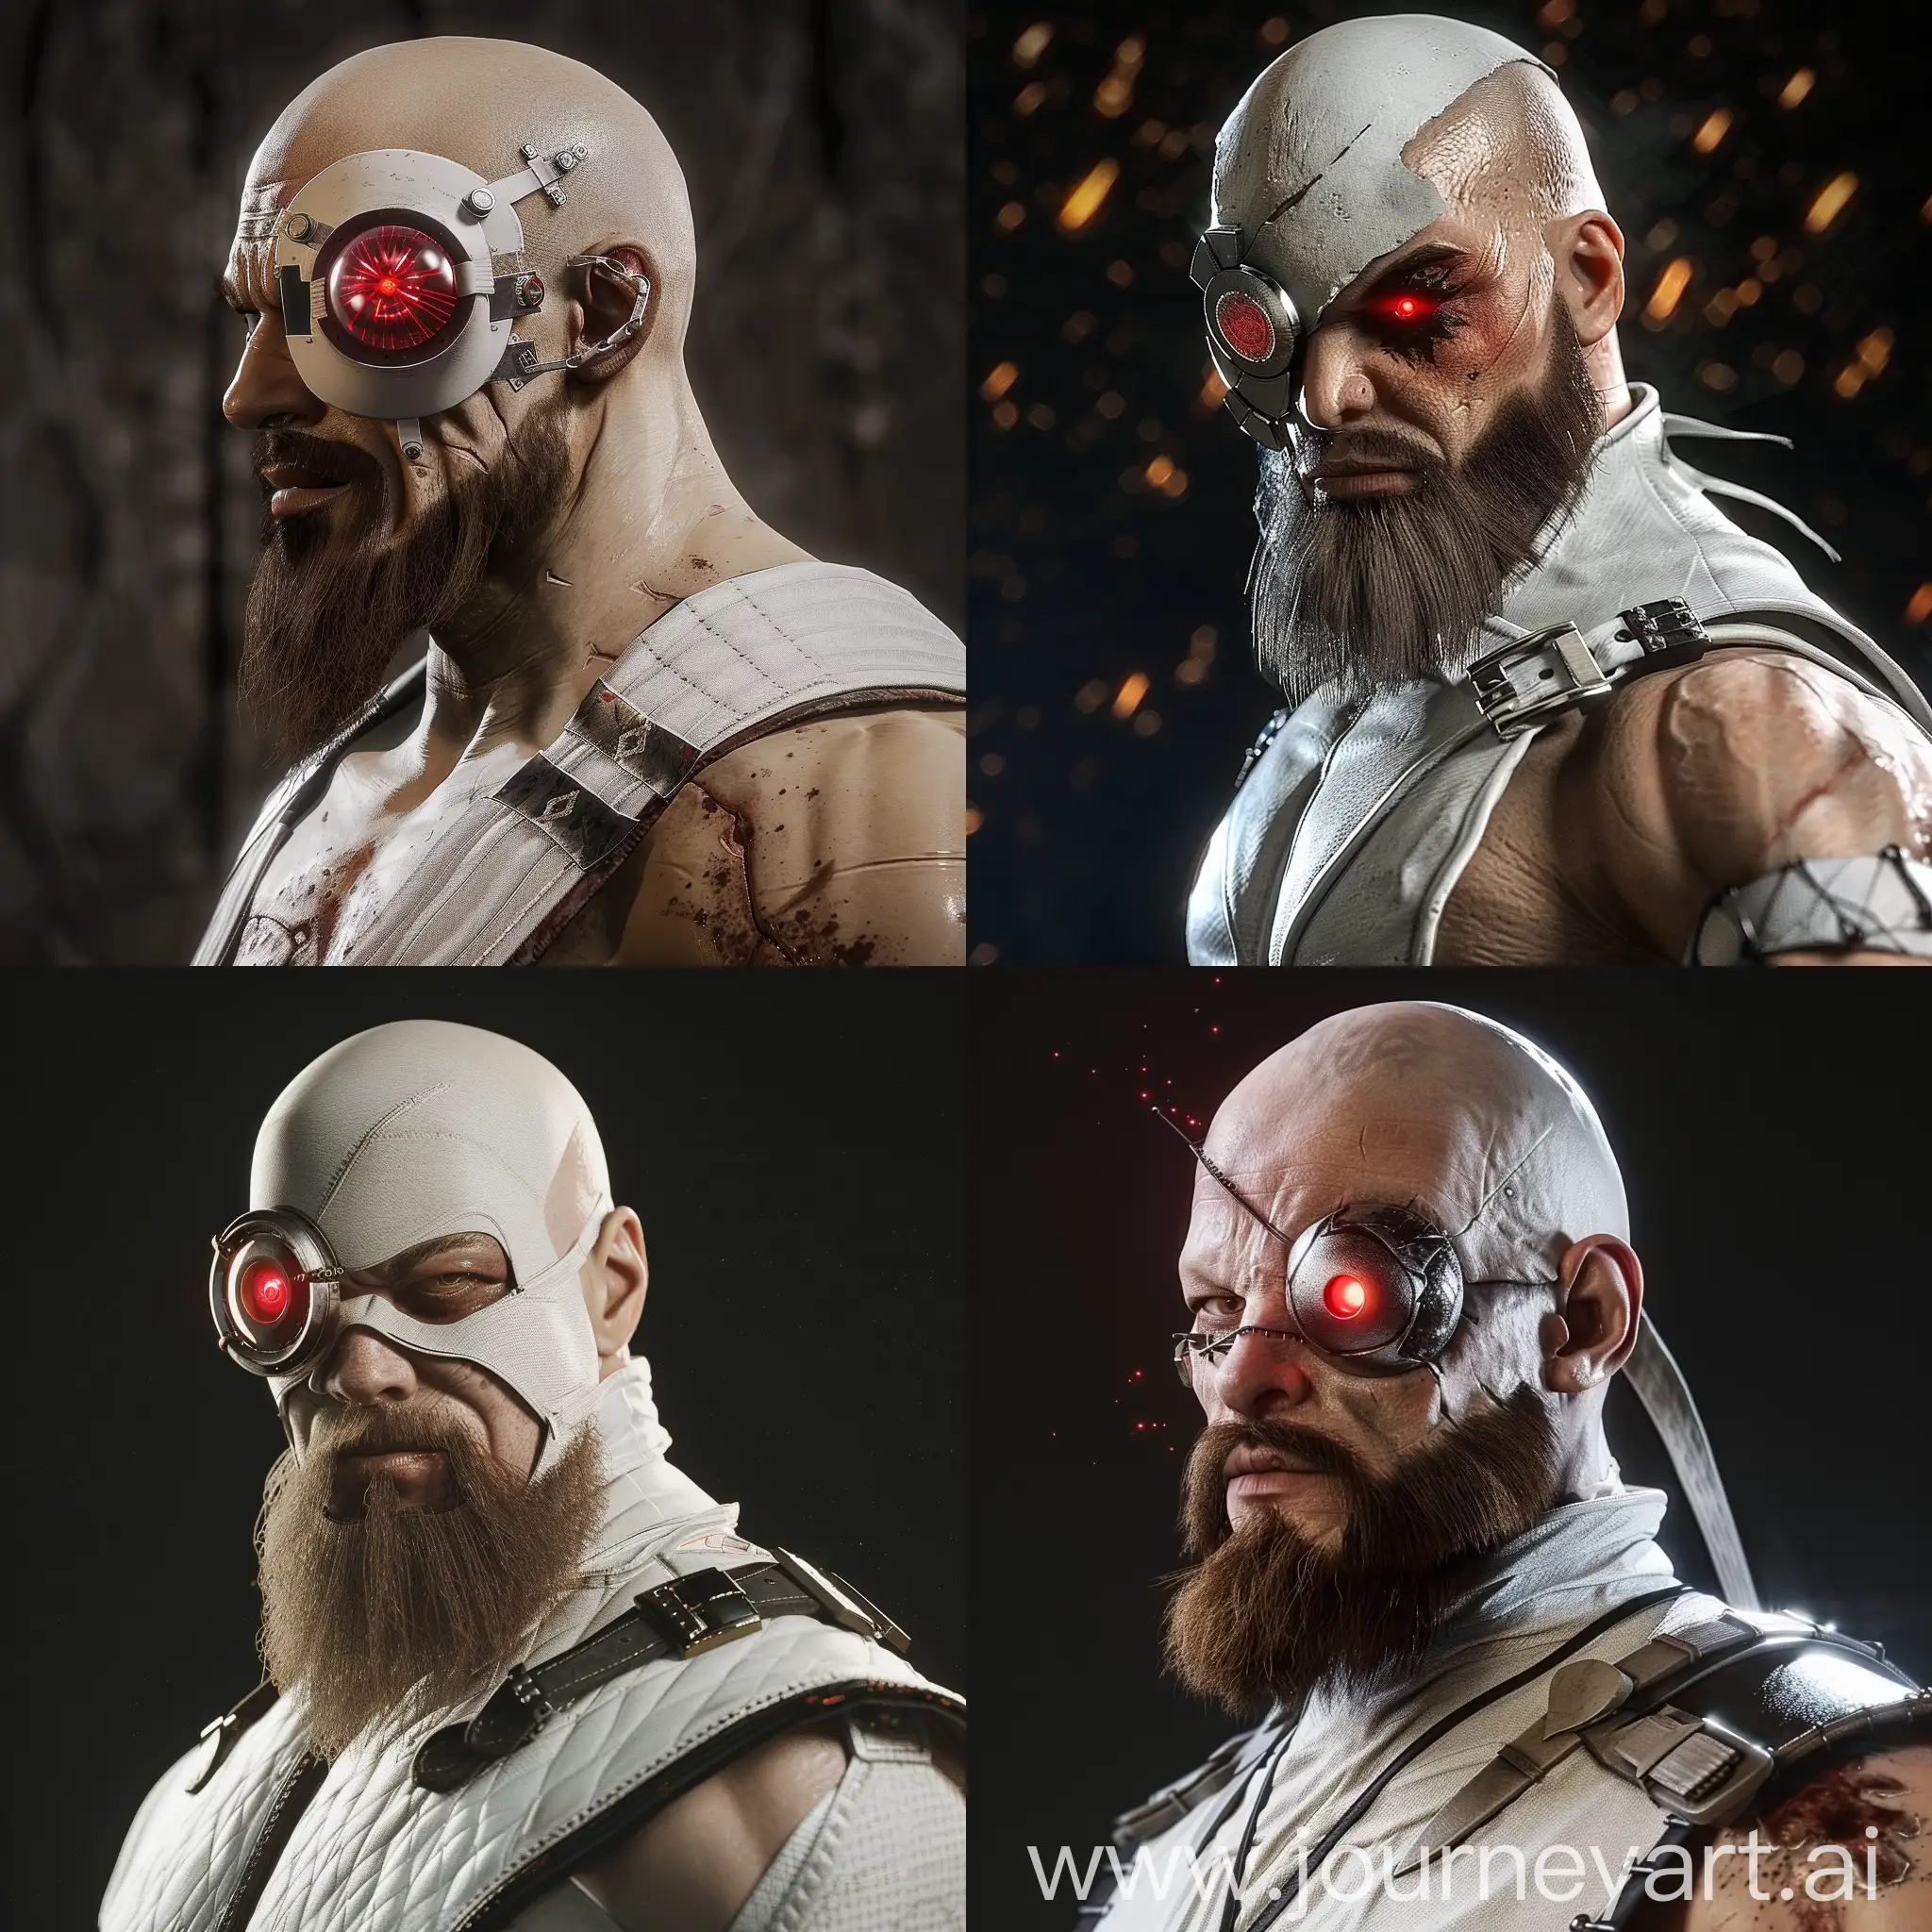 Kano-from-Mortal-Kombat-1-with-White-Bandit-Costume-and-Red-Laser-Eye-Implant